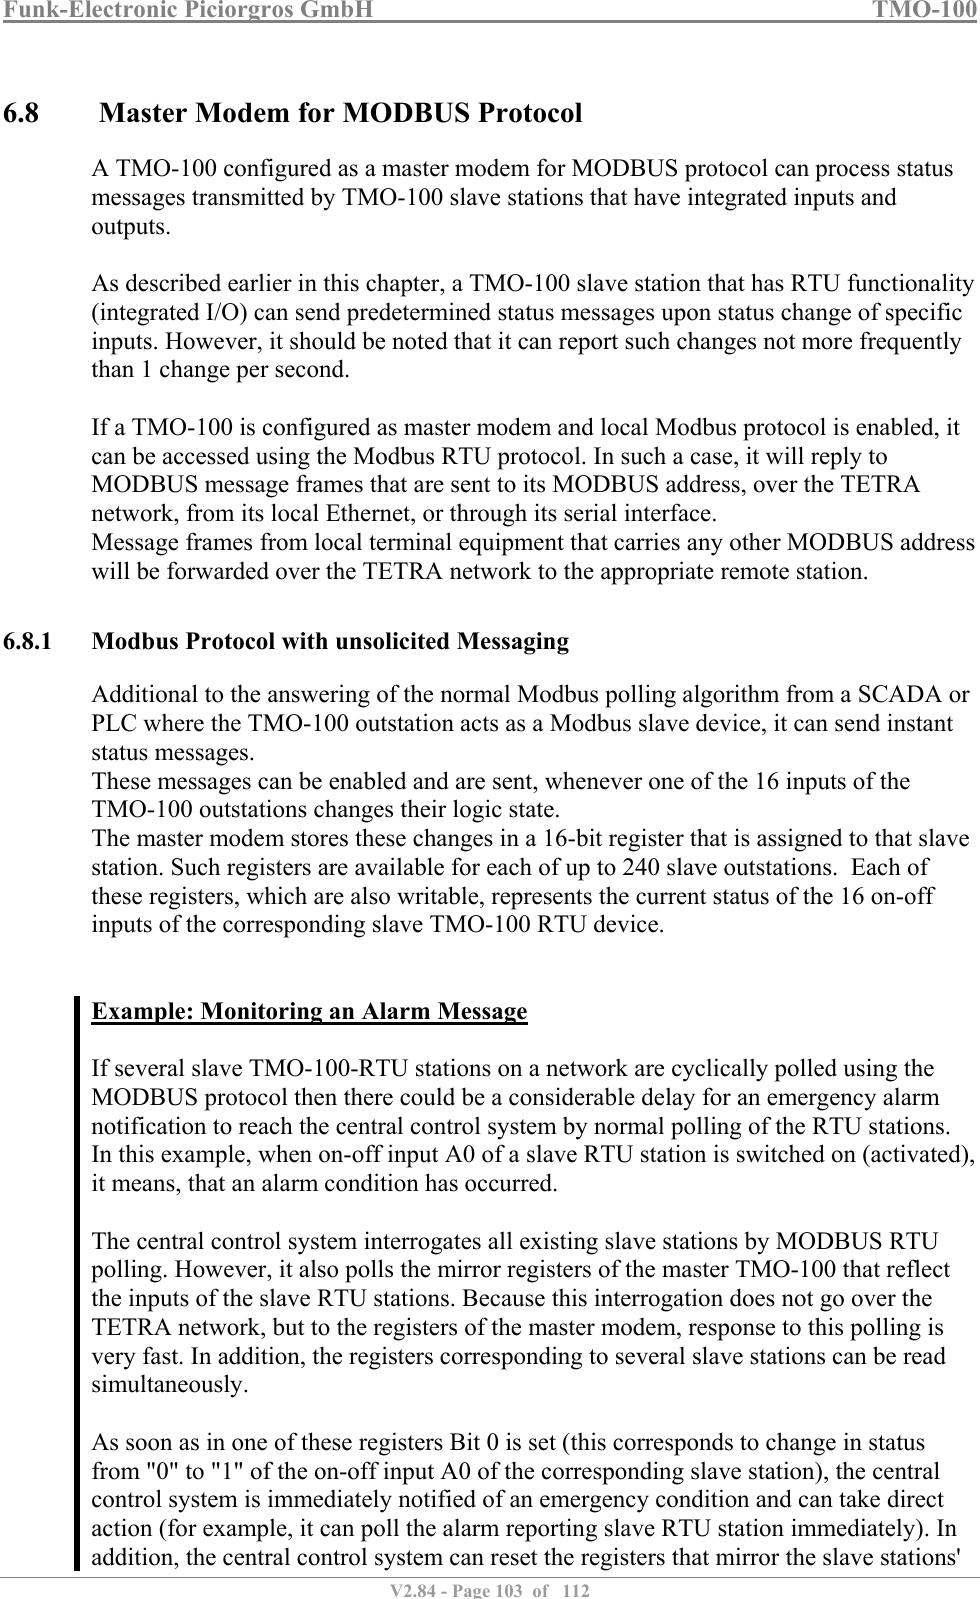 Funk-Electronic Piciorgros GmbH   TMO-100   V2.84 - Page 103  of   112   6.8  Master Modem for MODBUS Protocol A TMO-100 configured as a master modem for MODBUS protocol can process status messages transmitted by TMO-100 slave stations that have integrated inputs and outputs.  As described earlier in this chapter, a TMO-100 slave station that has RTU functionality (integrated I/O) can send predetermined status messages upon status change of specific inputs. However, it should be noted that it can report such changes not more frequently than 1 change per second.   If a TMO-100 is configured as master modem and local Modbus protocol is enabled, it can be accessed using the Modbus RTU protocol. In such a case, it will reply to MODBUS message frames that are sent to its MODBUS address, over the TETRA network, from its local Ethernet, or through its serial interface.  Message frames from local terminal equipment that carries any other MODBUS address will be forwarded over the TETRA network to the appropriate remote station.   6.8.1 Modbus Protocol with unsolicited Messaging Additional to the answering of the normal Modbus polling algorithm from a SCADA or PLC where the TMO-100 outstation acts as a Modbus slave device, it can send instant status messages. These messages can be enabled and are sent, whenever one of the 16 inputs of the TMO-100 outstations changes their logic state. The master modem stores these changes in a 16-bit register that is assigned to that slave station. Such registers are available for each of up to 240 slave outstations.  Each of these registers, which are also writable, represents the current status of the 16 on-off inputs of the corresponding slave TMO-100 RTU device.   Example: Monitoring an Alarm Message  If several slave TMO-100-RTU stations on a network are cyclically polled using the MODBUS protocol then there could be a considerable delay for an emergency alarm notification to reach the central control system by normal polling of the RTU stations.  In this example, when on-off input A0 of a slave RTU station is switched on (activated), it means, that an alarm condition has occurred.   The central control system interrogates all existing slave stations by MODBUS RTU polling. However, it also polls the mirror registers of the master TMO-100 that reflect the inputs of the slave RTU stations. Because this interrogation does not go over the TETRA network, but to the registers of the master modem, response to this polling is very fast. In addition, the registers corresponding to several slave stations can be read simultaneously.   As soon as in one of these registers Bit 0 is set (this corresponds to change in status from &quot;0&quot; to &quot;1&quot; of the on-off input A0 of the corresponding slave station), the central control system is immediately notified of an emergency condition and can take direct action (for example, it can poll the alarm reporting slave RTU station immediately). In addition, the central control system can reset the registers that mirror the slave stations&apos; 